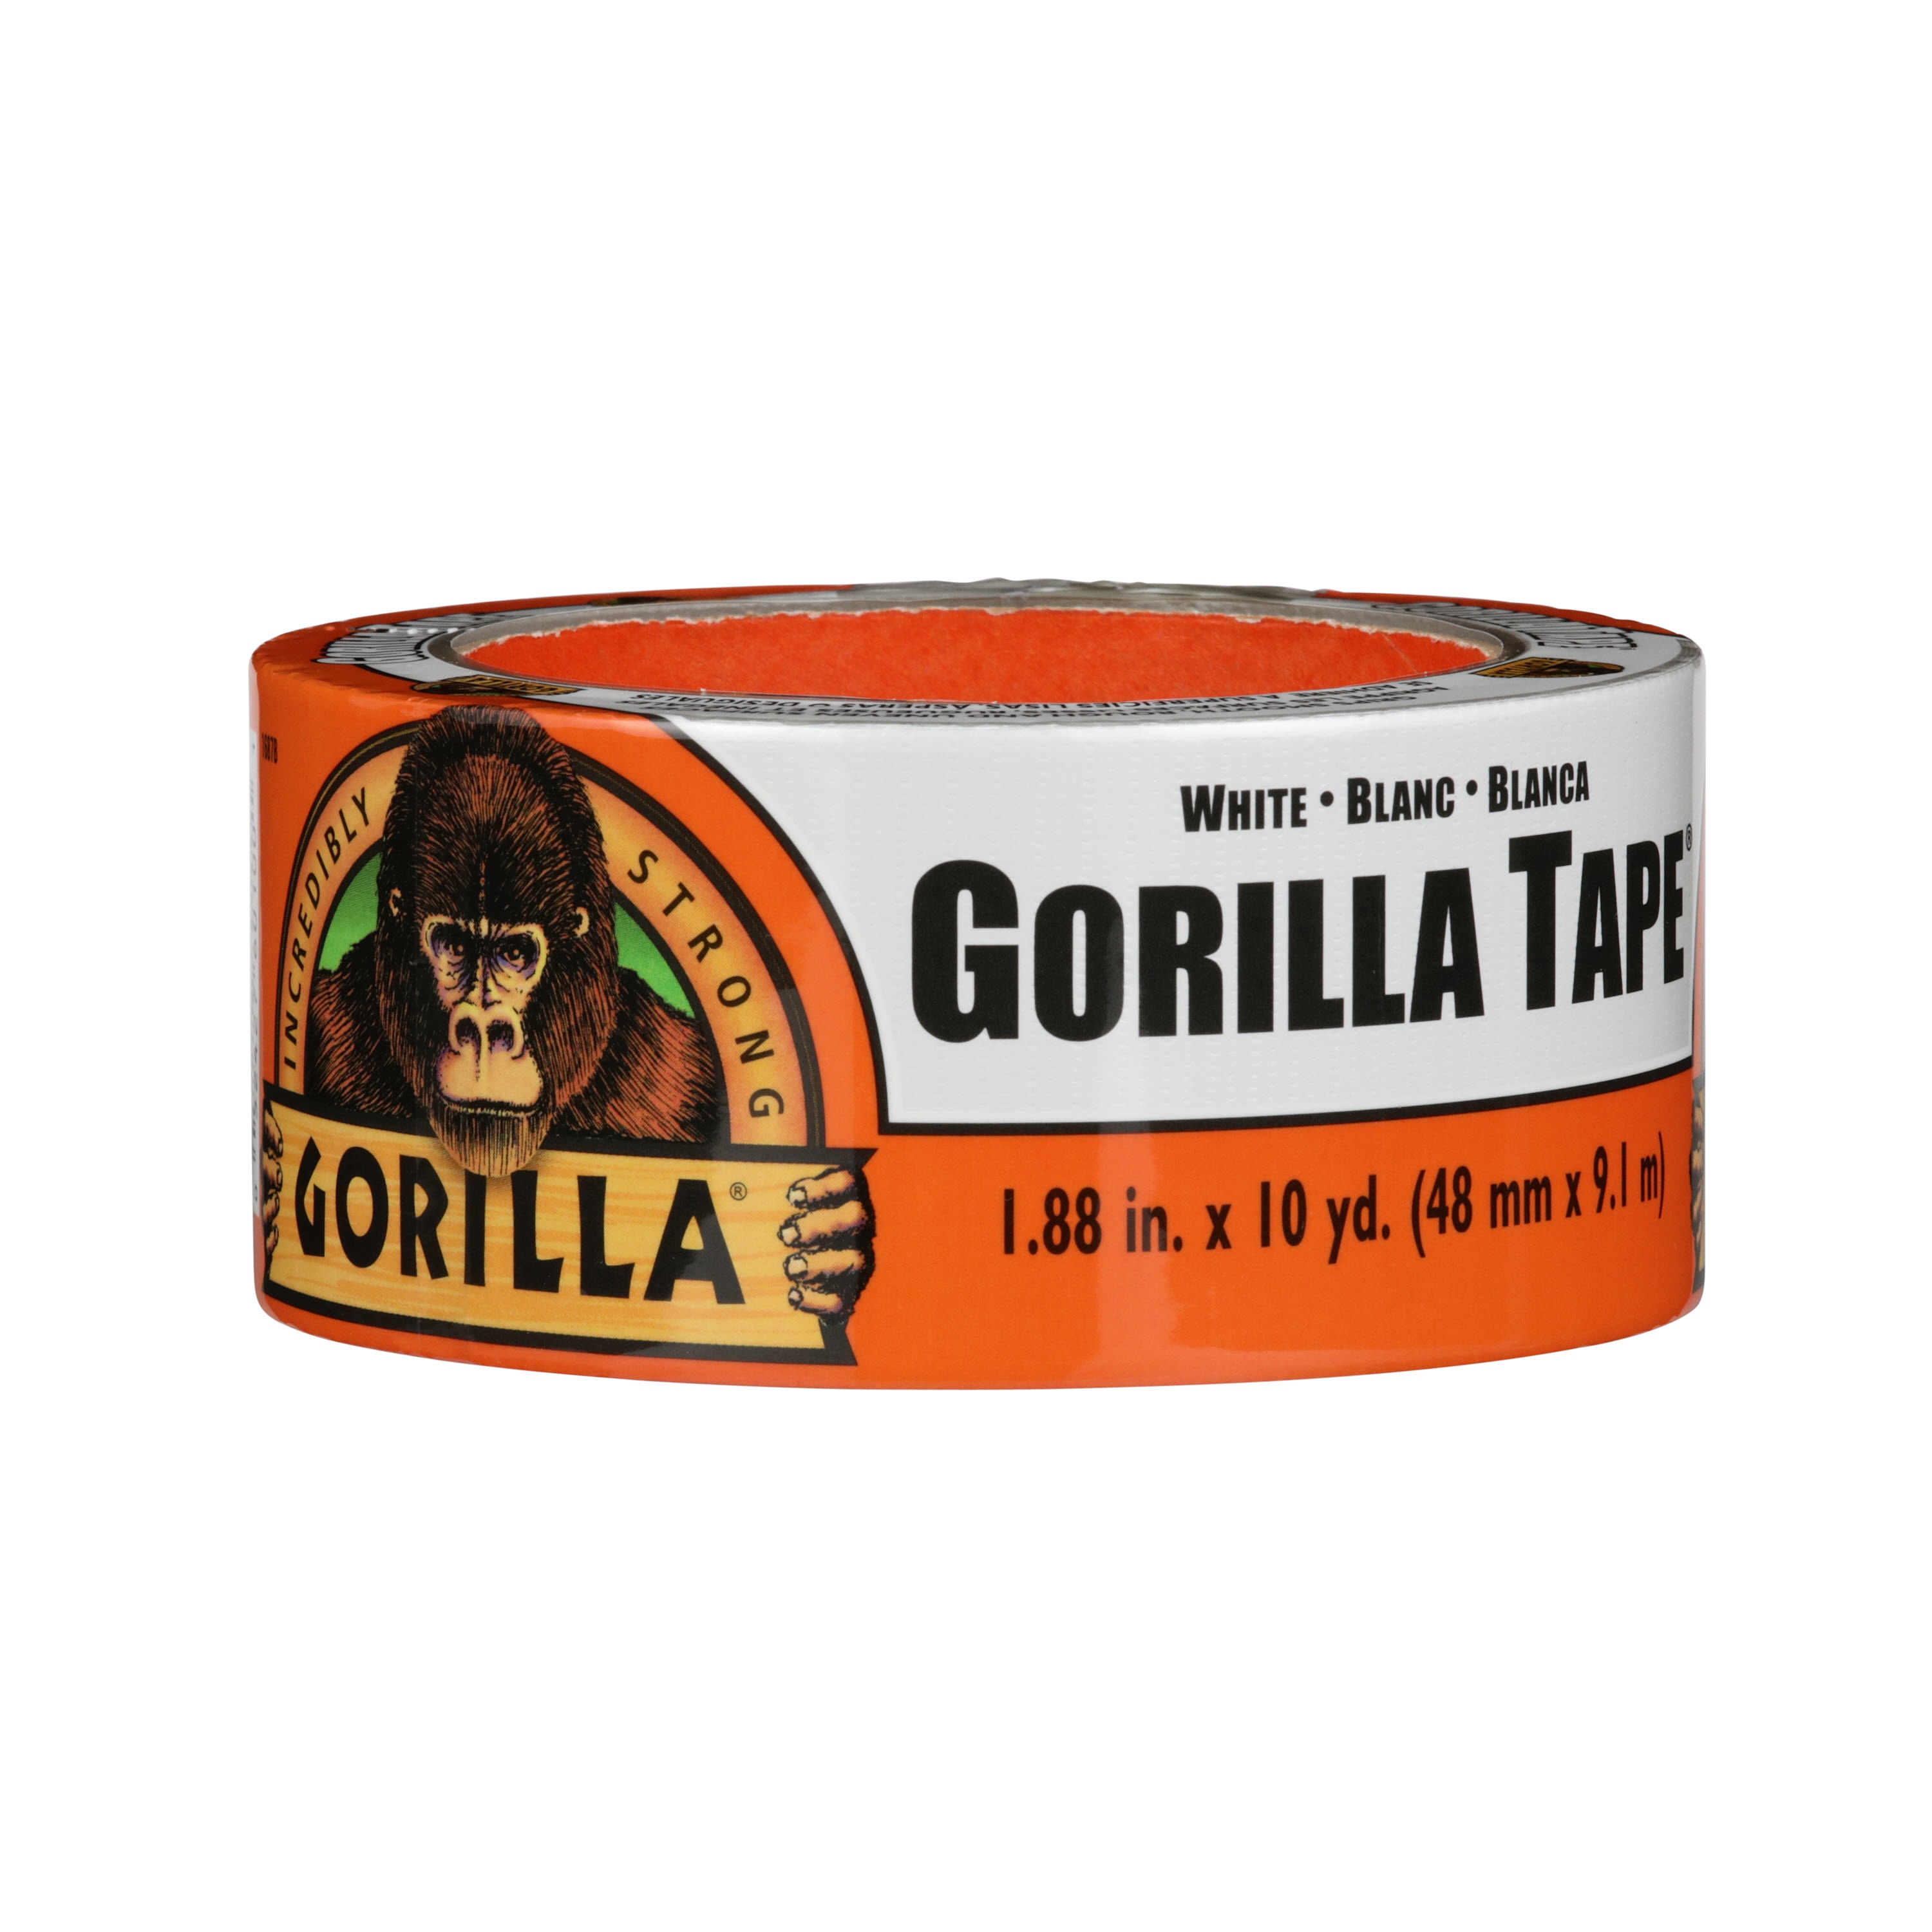 Black Gorilla Tape Double Thick Adhesive Tough Weather Resistant 1.88 in x 10 yd 